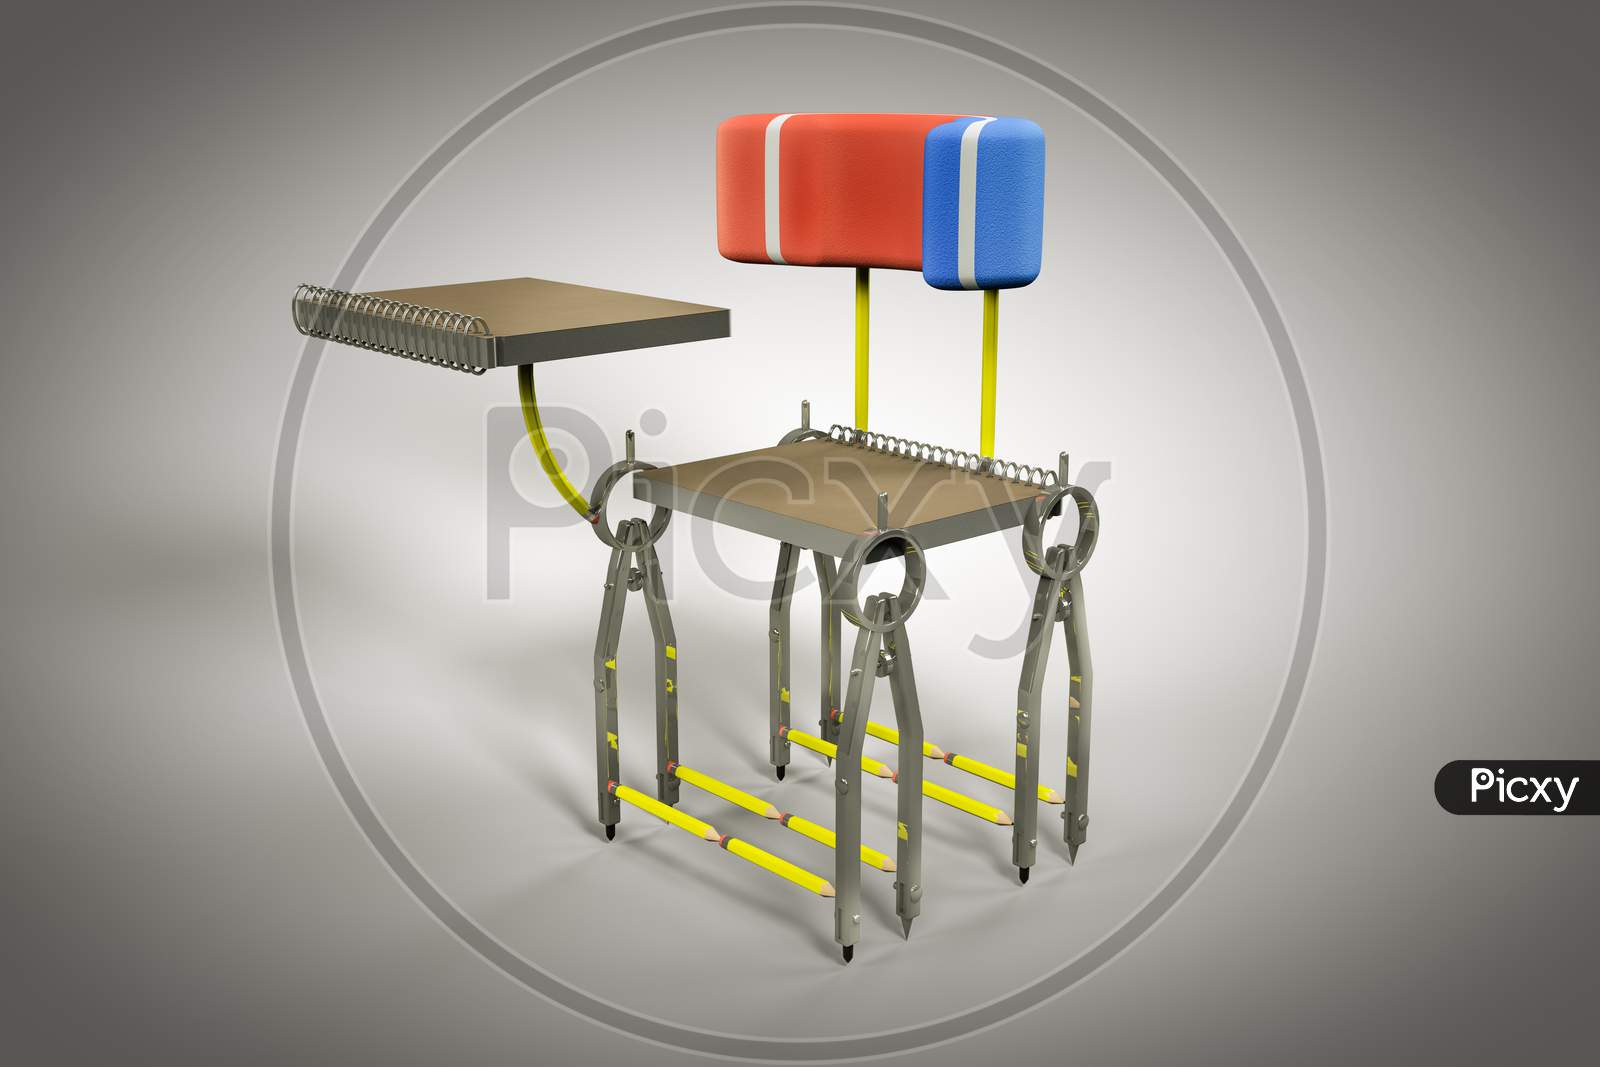 School Supplies In A Shape Of College Desk Table In White-Grey Background. Back To School Or Ready For School Or Education And Reading Concept. 3D Illustration